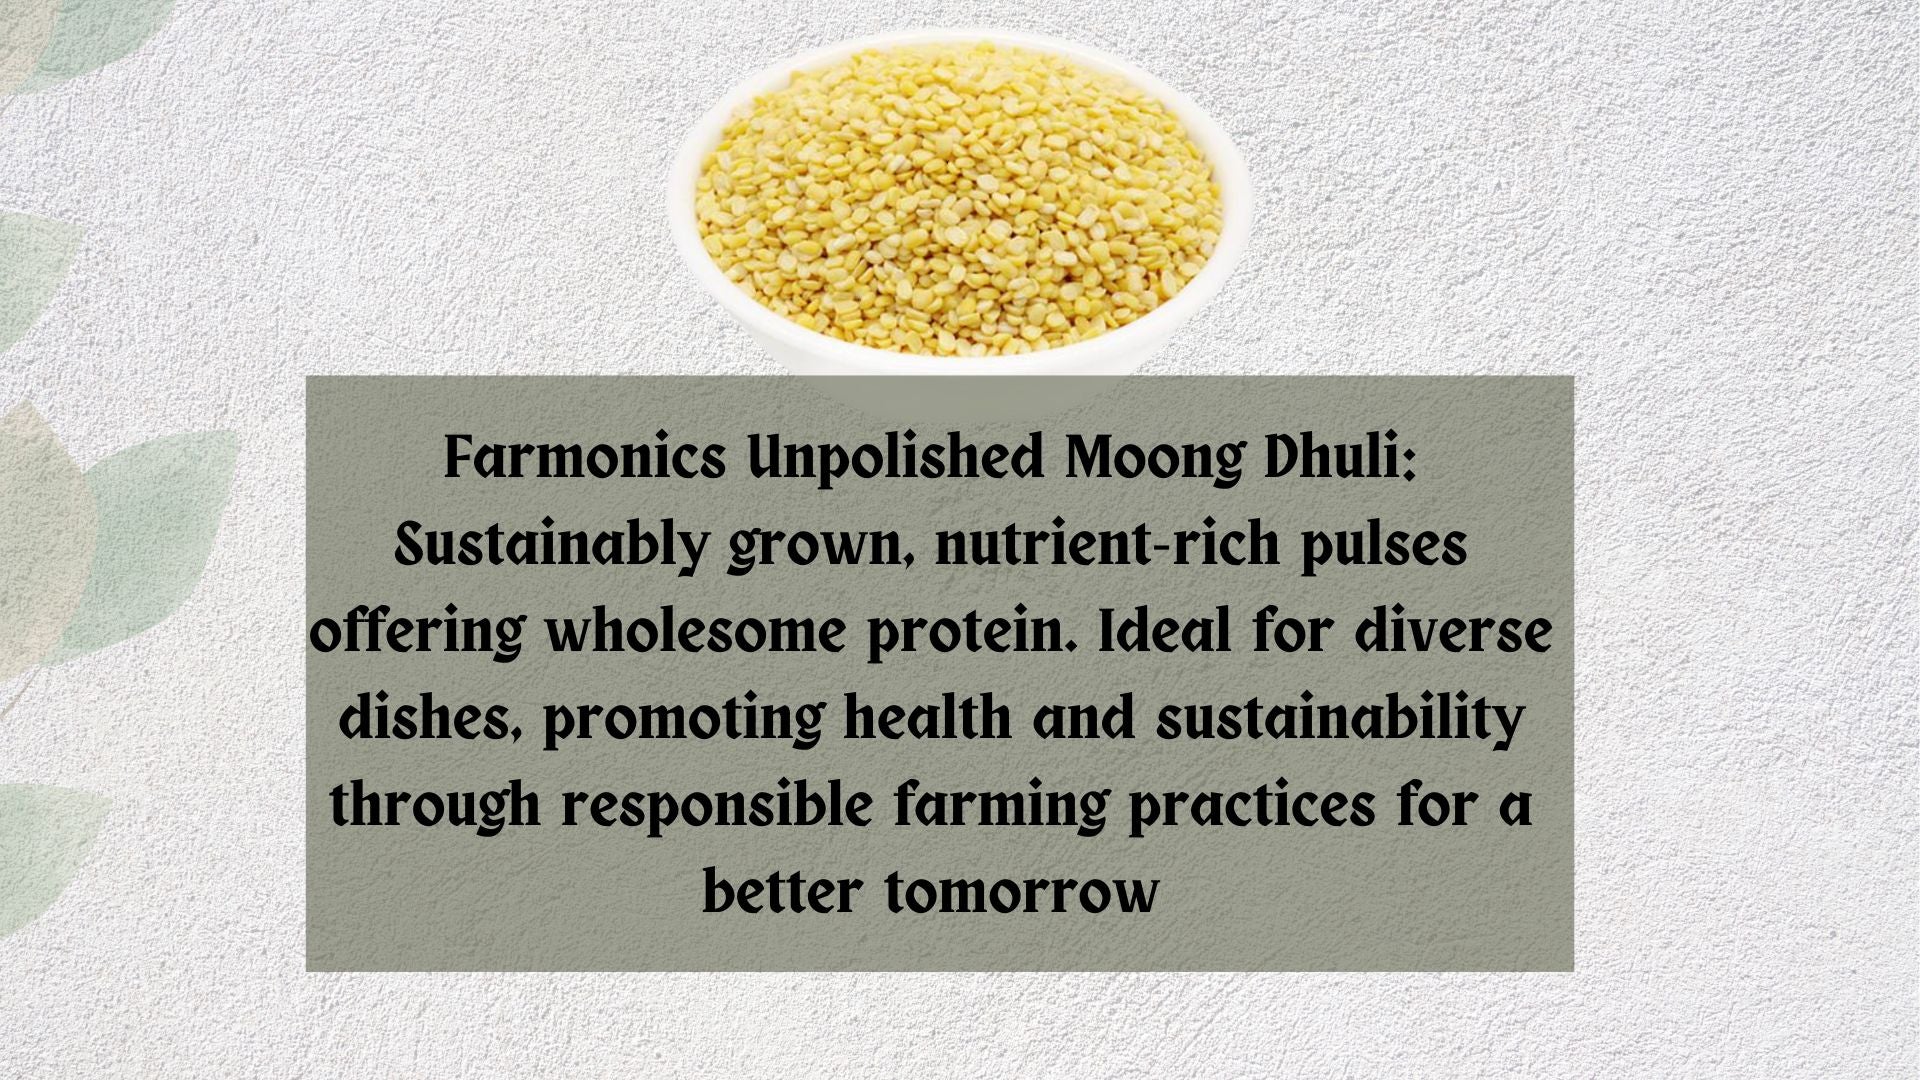 Here are some of the information about Farmonics best quality unpolished moong dhuli 